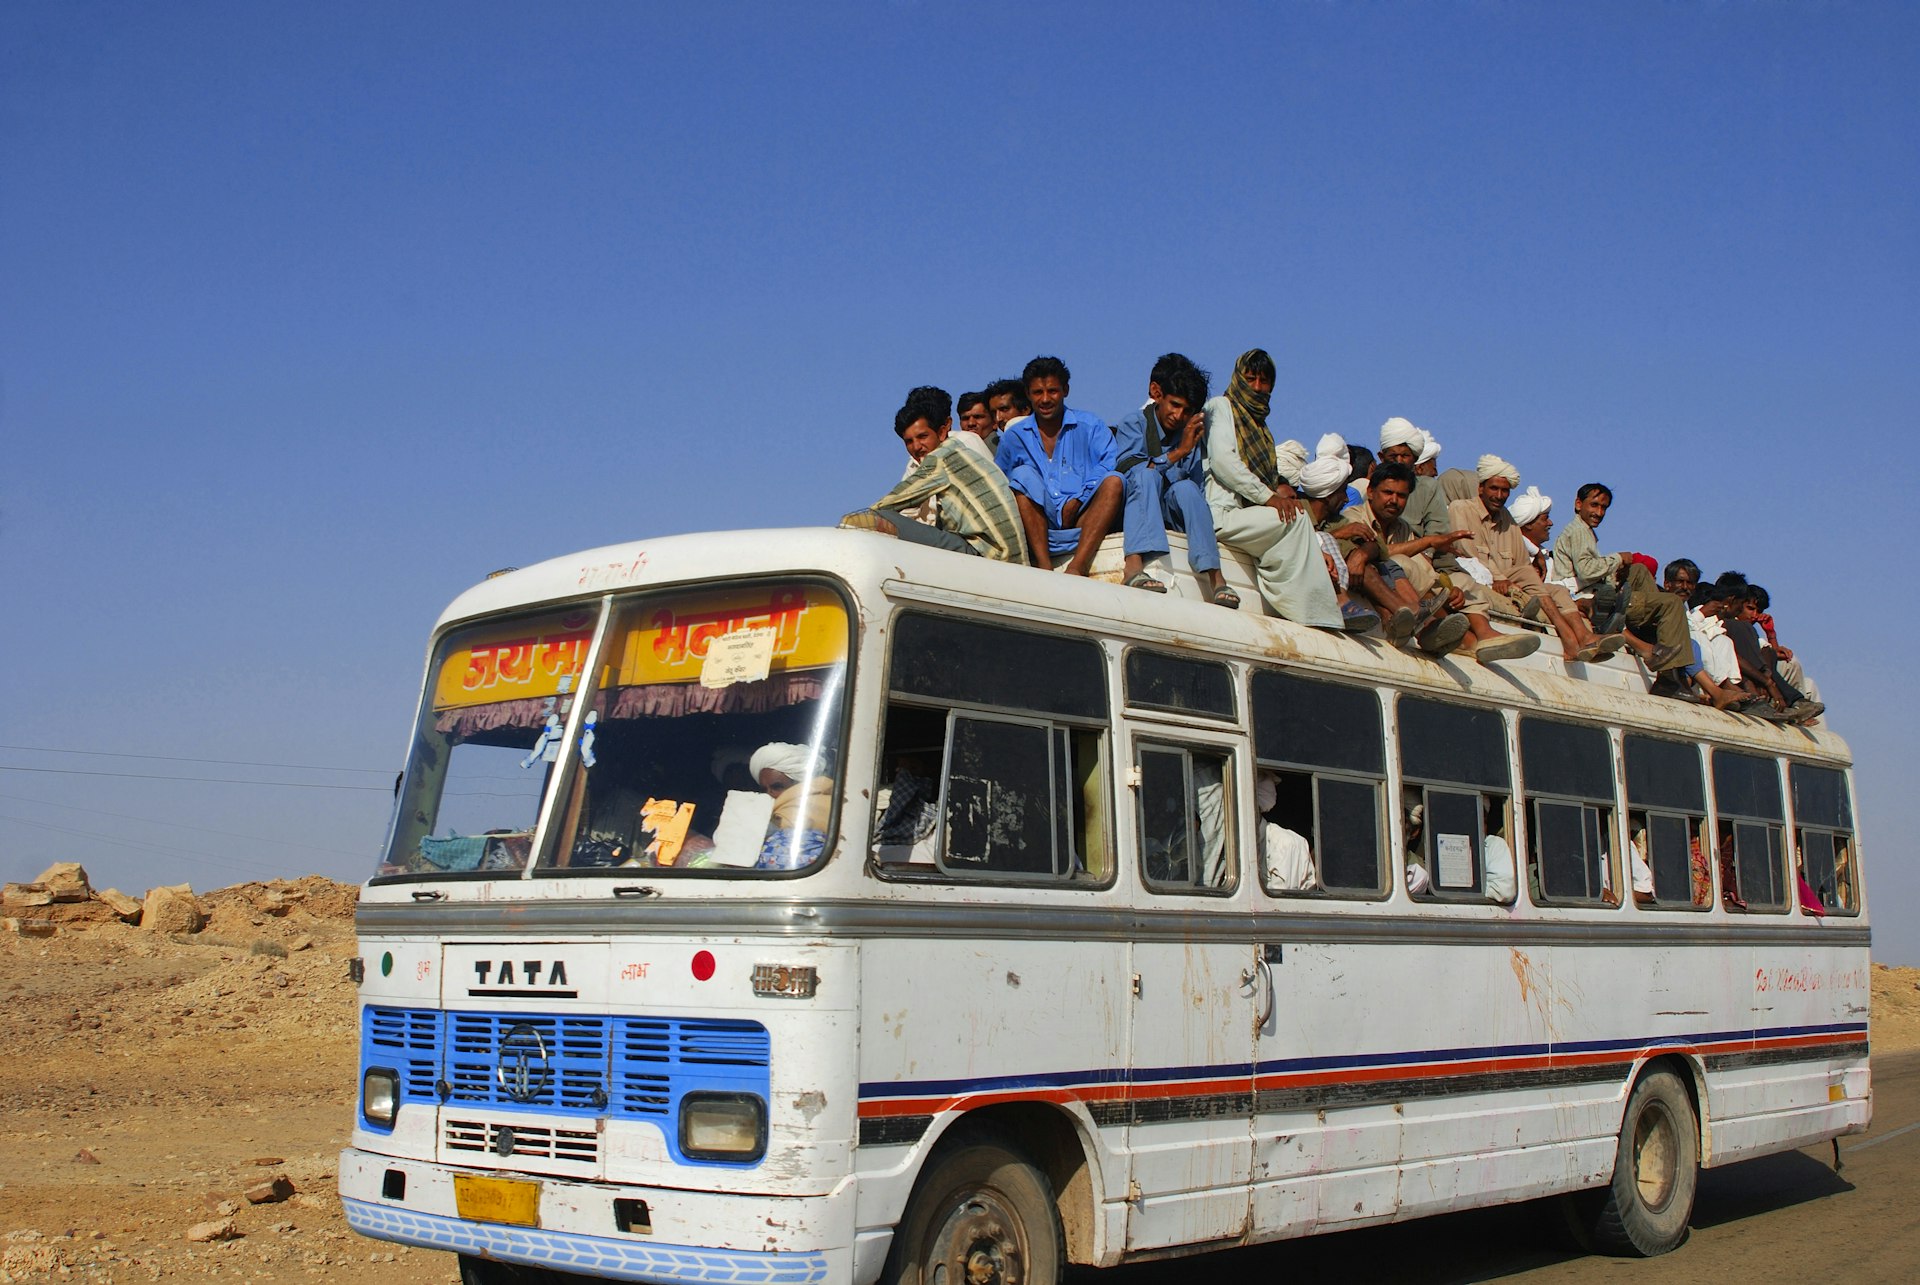 People crowding on the roof of a bus as it drives through an arid landscape